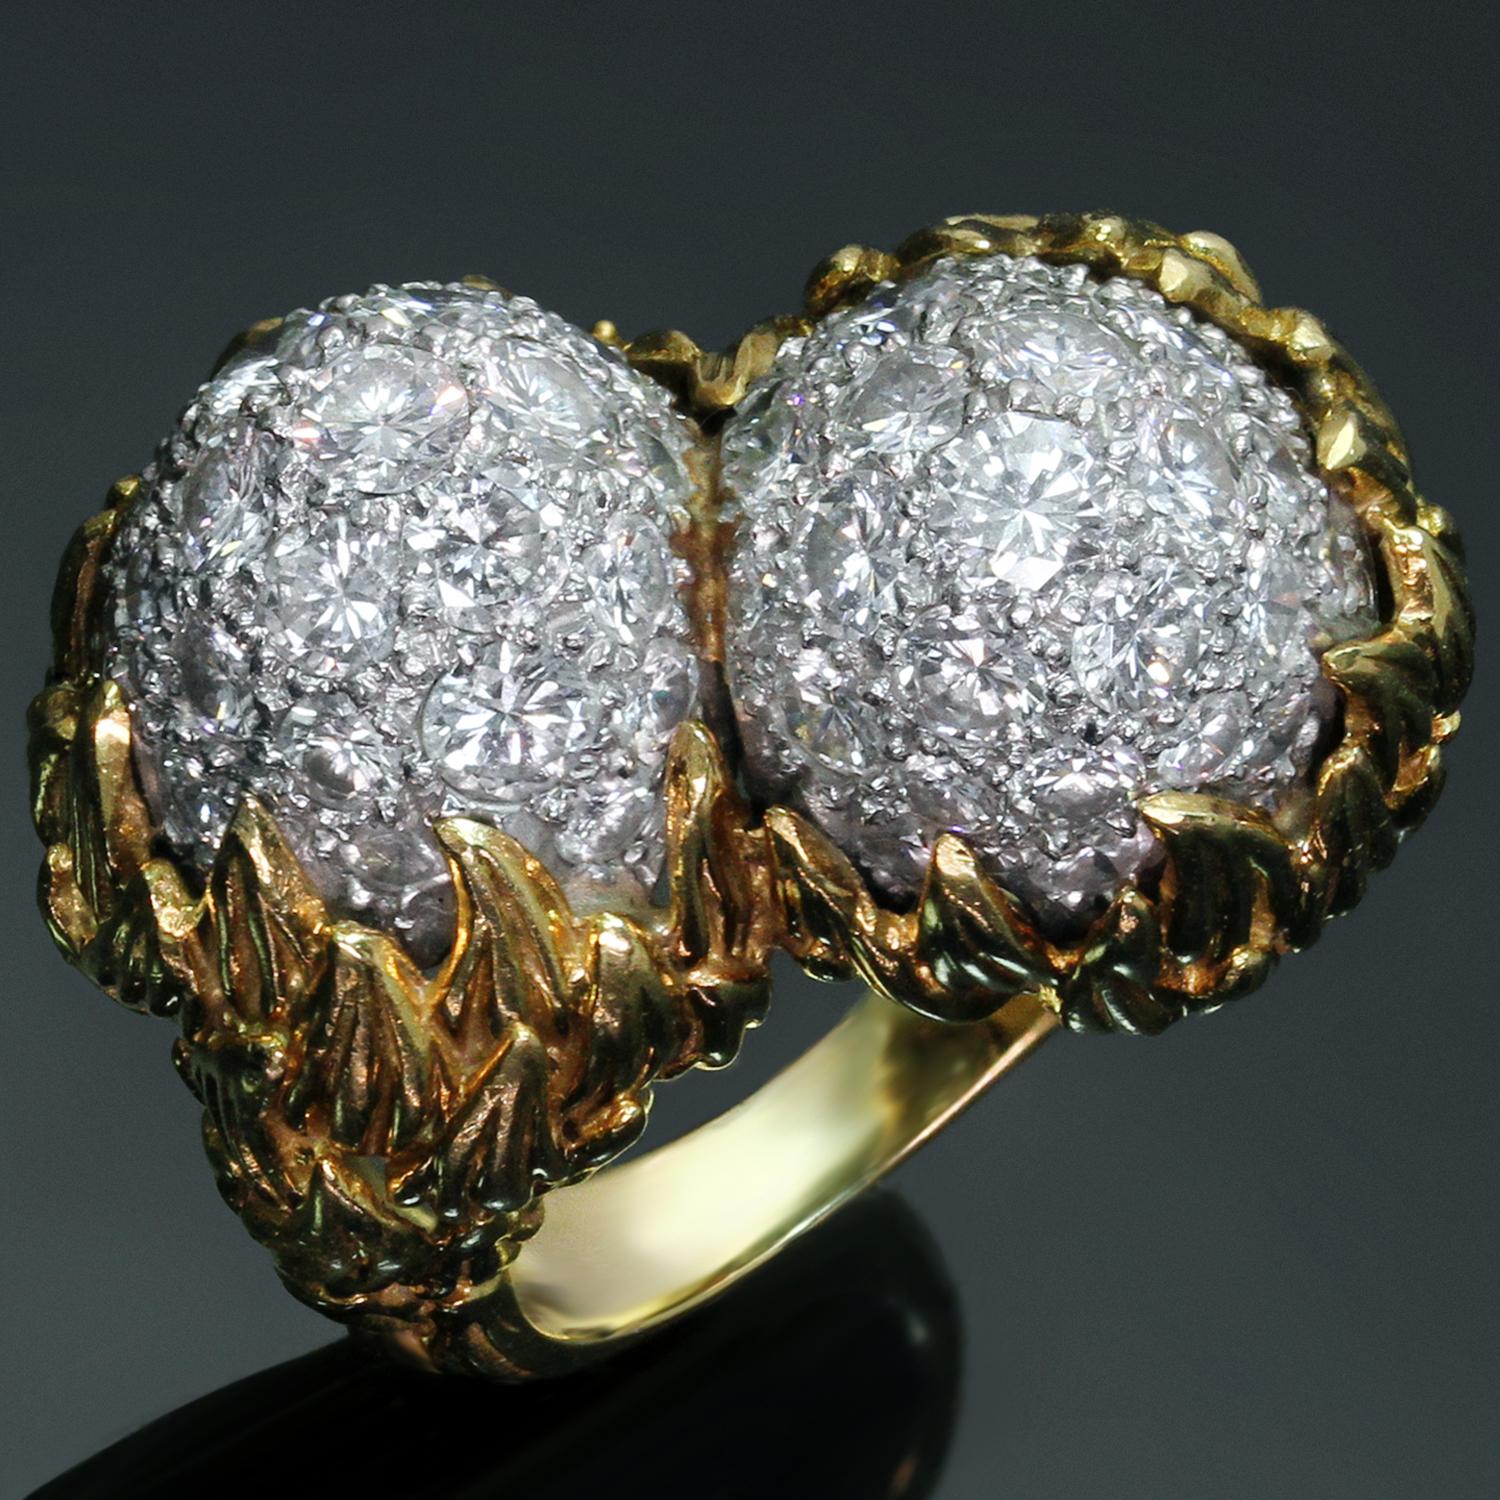 This fabulous vintage Tiffany & Co. ring feature a retro double acorn design crafted in 18k yellow gold and set in platinum with brilliant-cut round diamonds weighing an estimated 3.50 - 4.00 carats. Made in United States circa 1960s. Measurements: